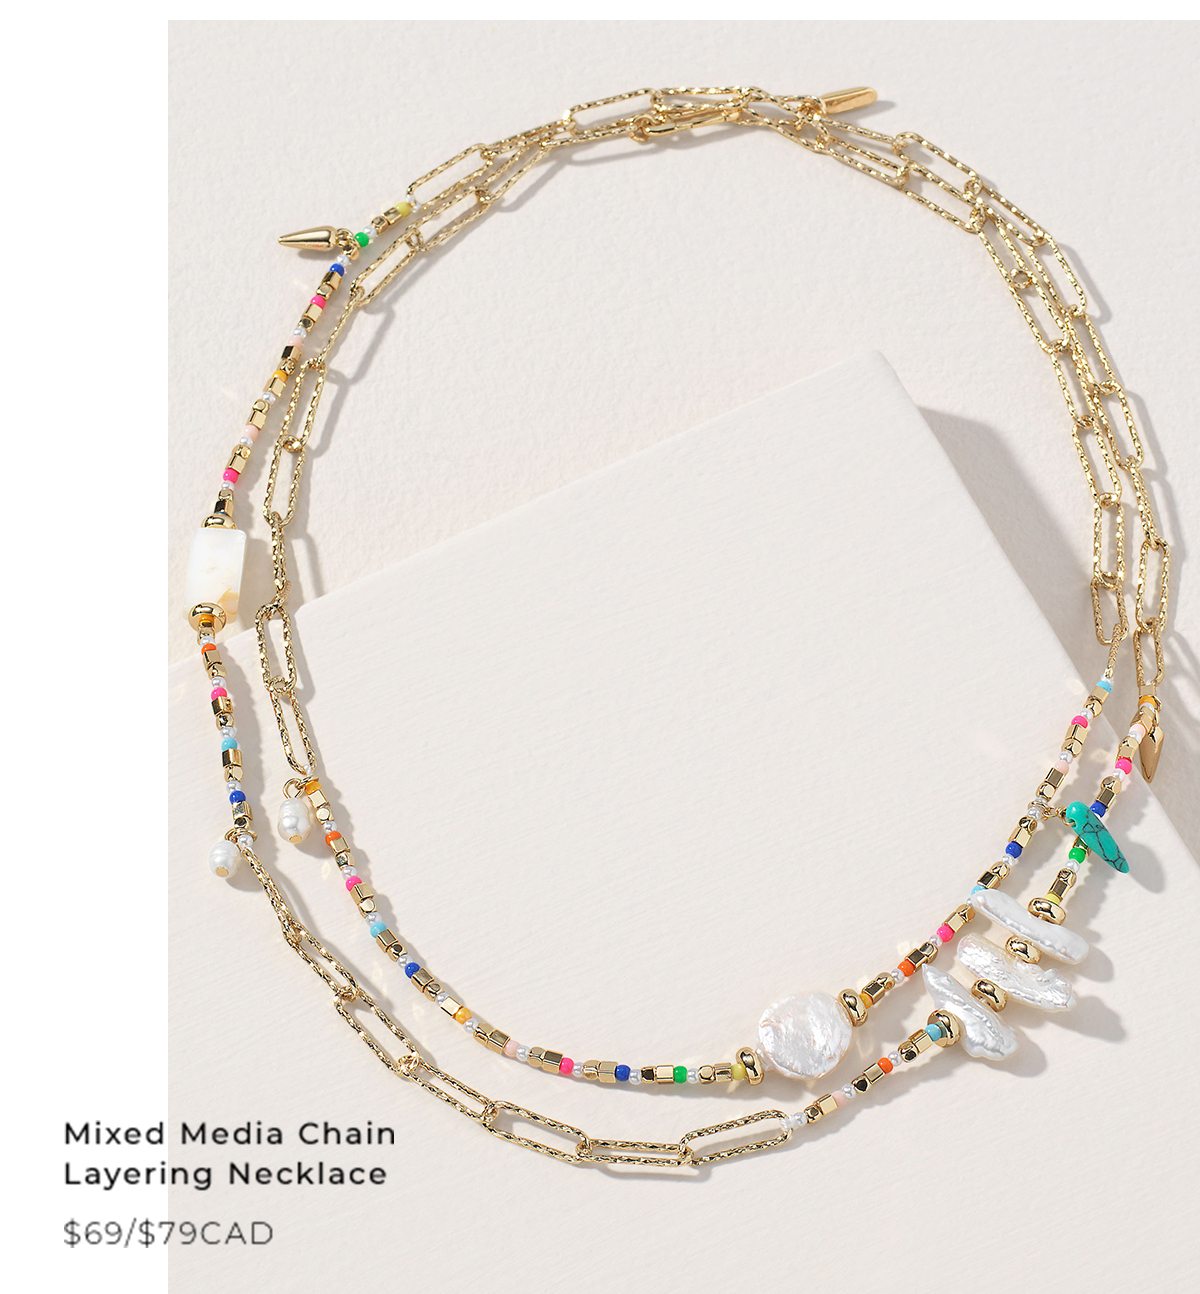 Mixed Media Wrap Necklace - perfect for layering